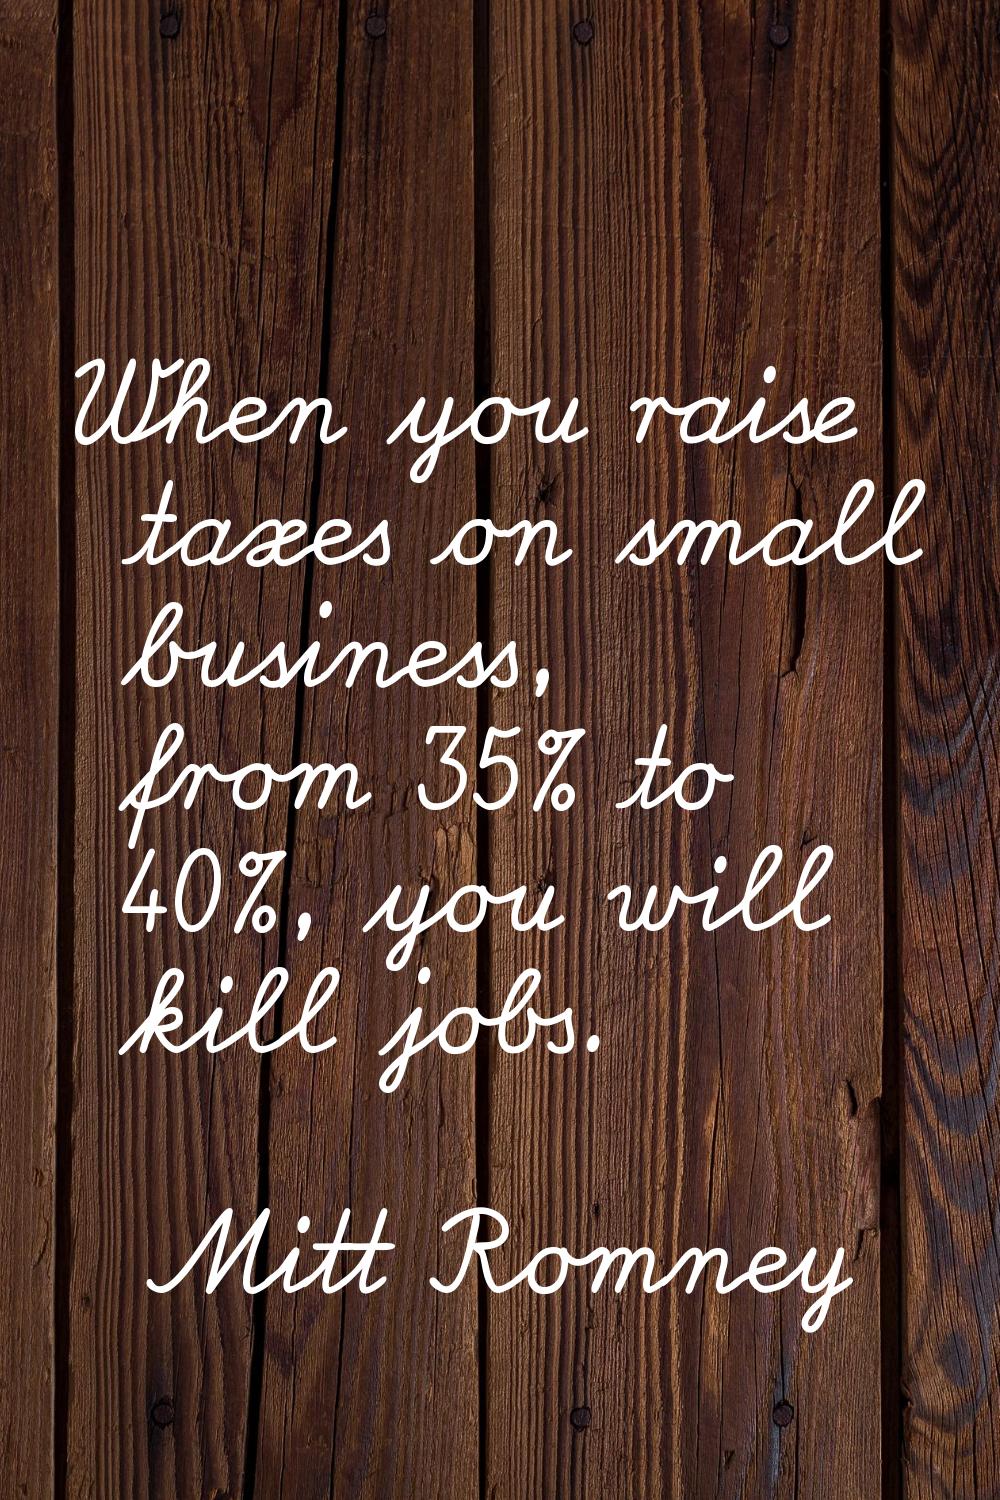 When you raise taxes on small business, from 35% to 40%, you will kill jobs.